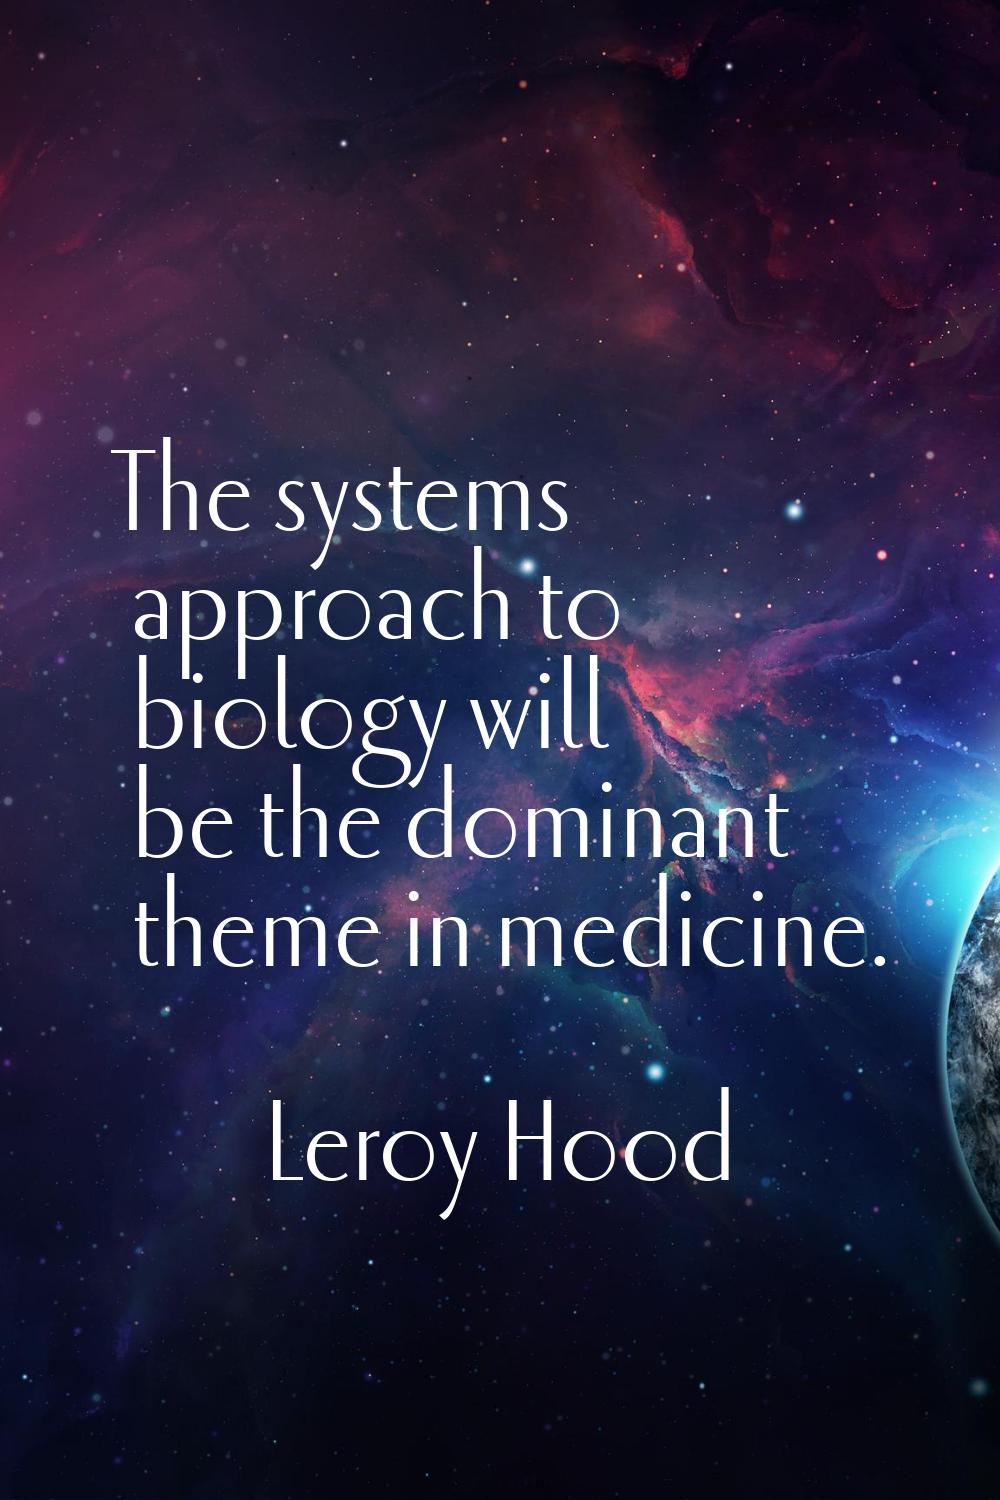 The systems approach to biology will be the dominant theme in medicine.